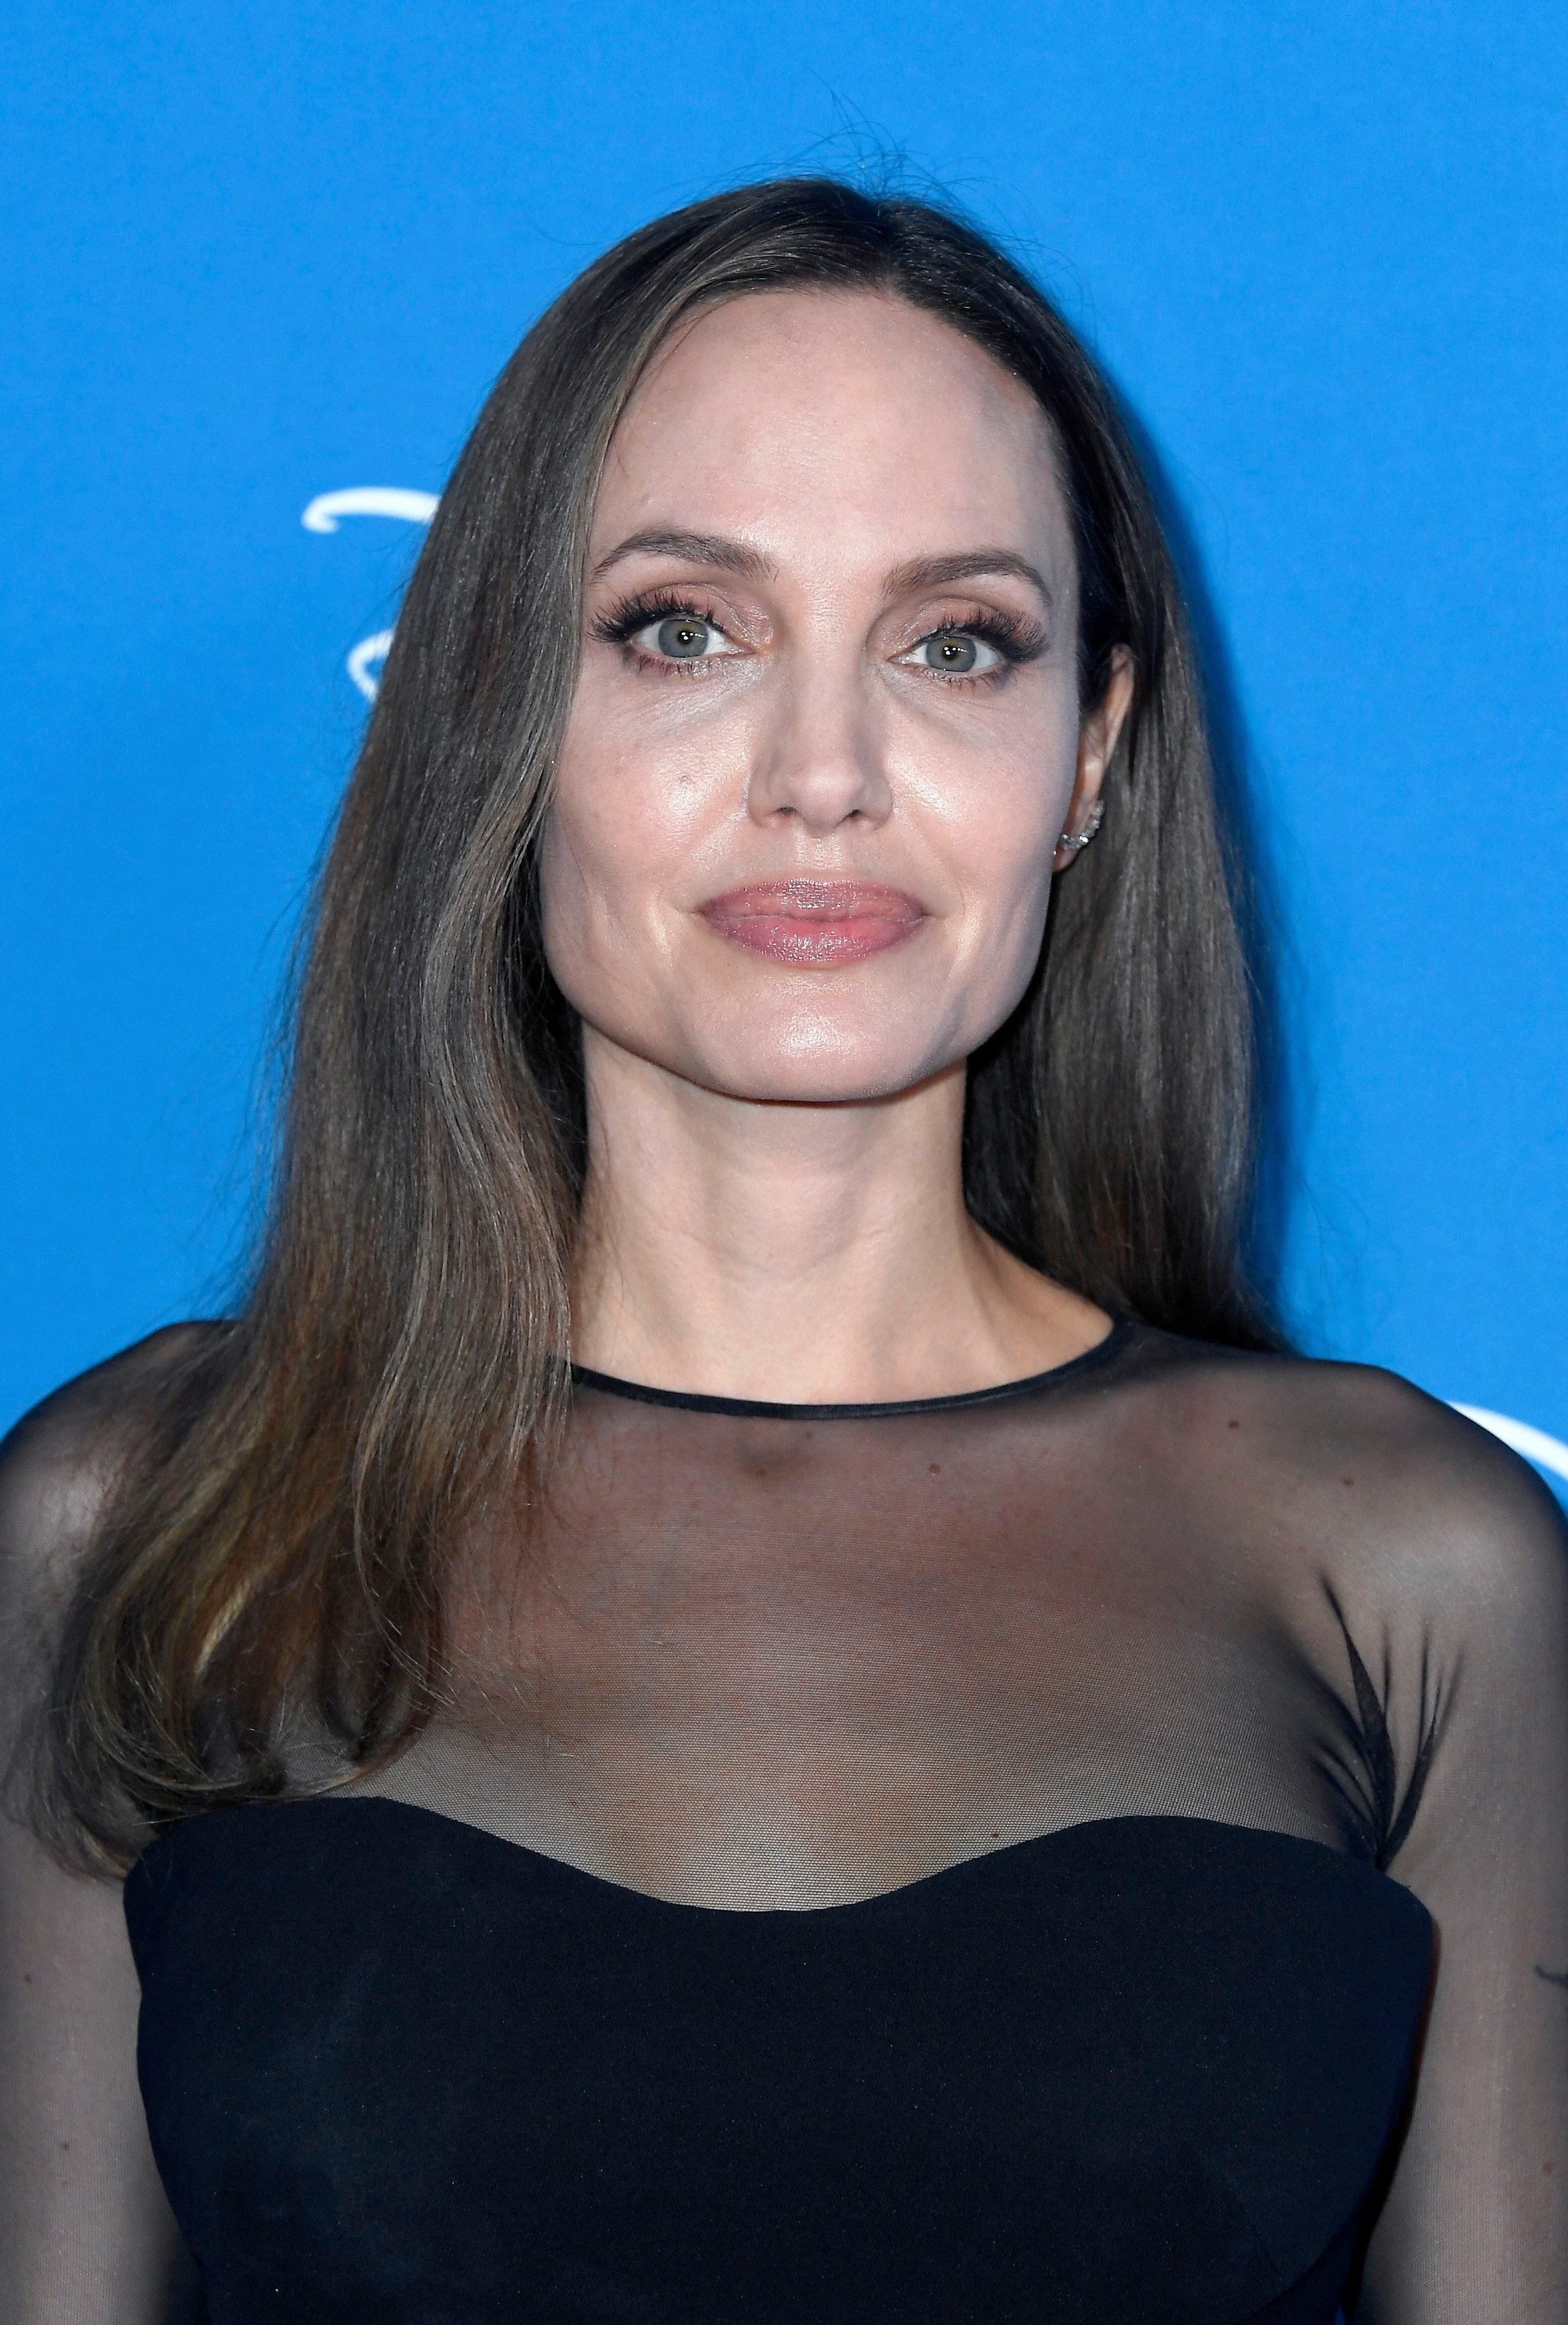 Angelina Jolie leaves Disney fans spellbound with behind-the ...